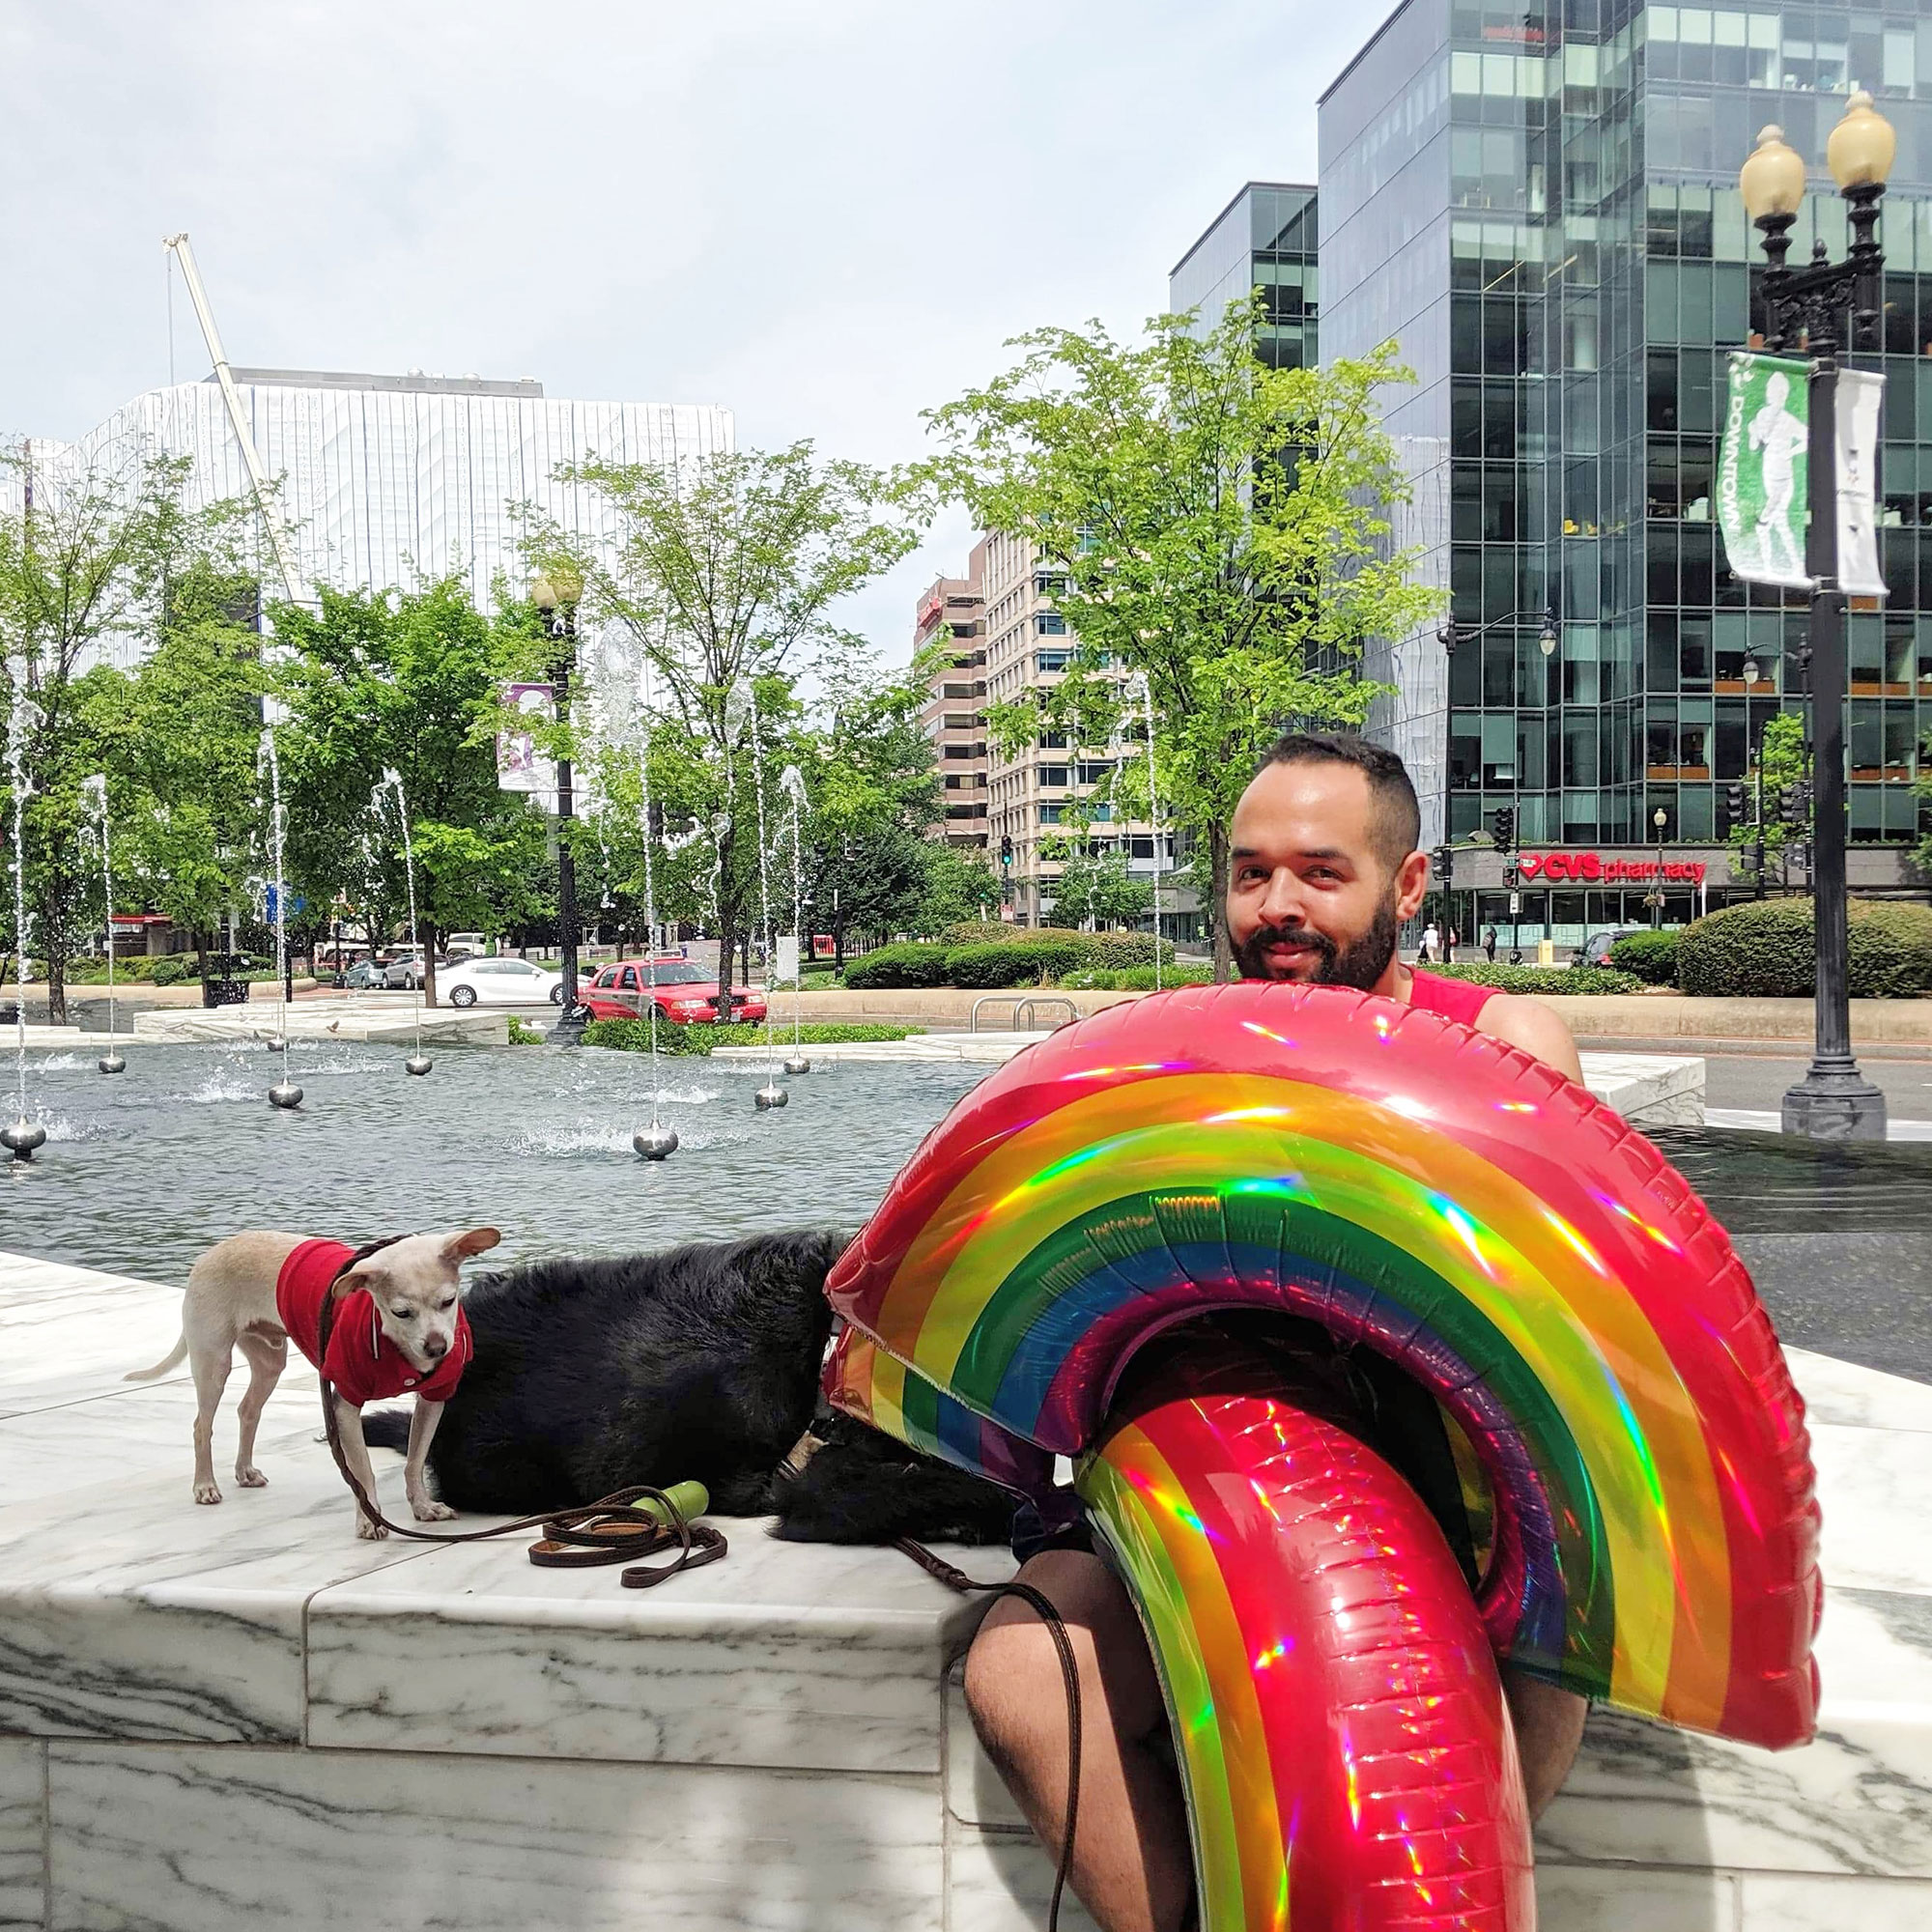 Dennis posing with the dogs and obnoxious rainbow balloons near Washington D.C.'s CityCenter.